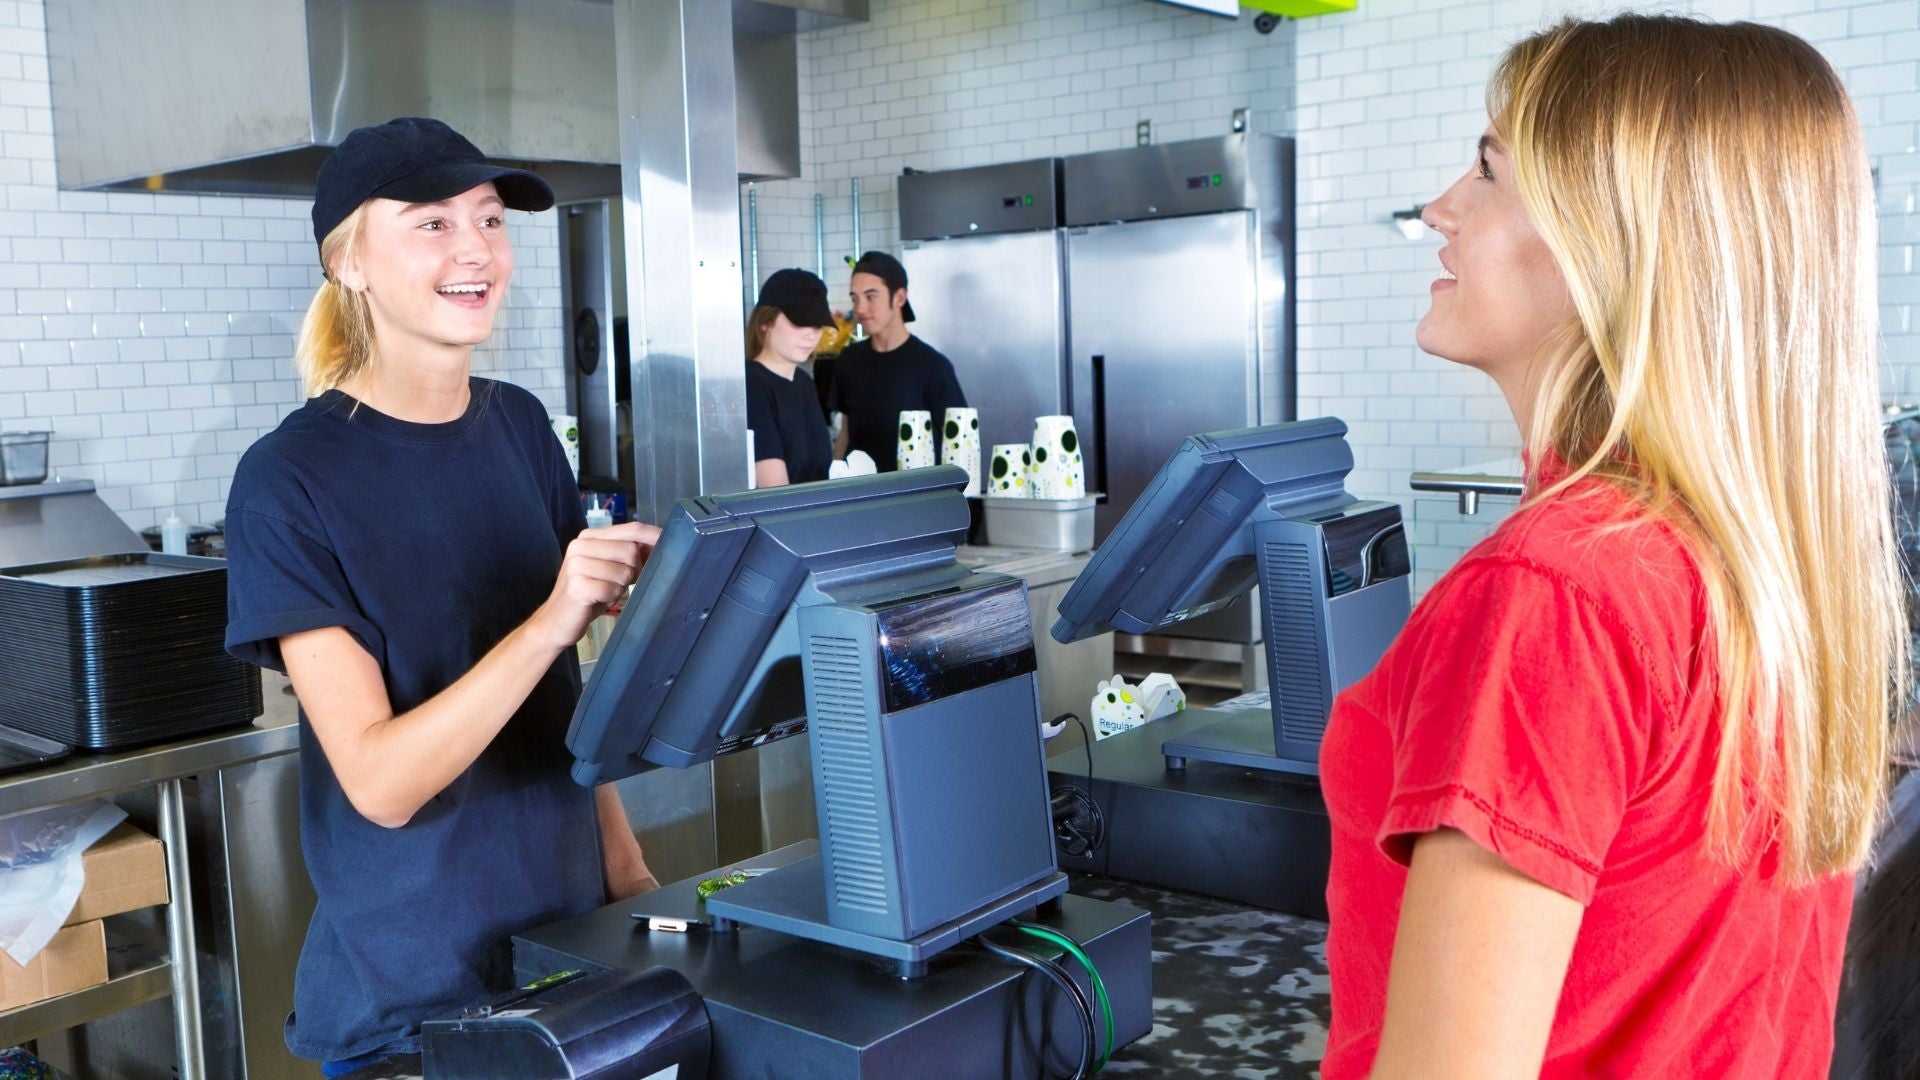 The Top Security Camera Solutions for the Fast Food Industry